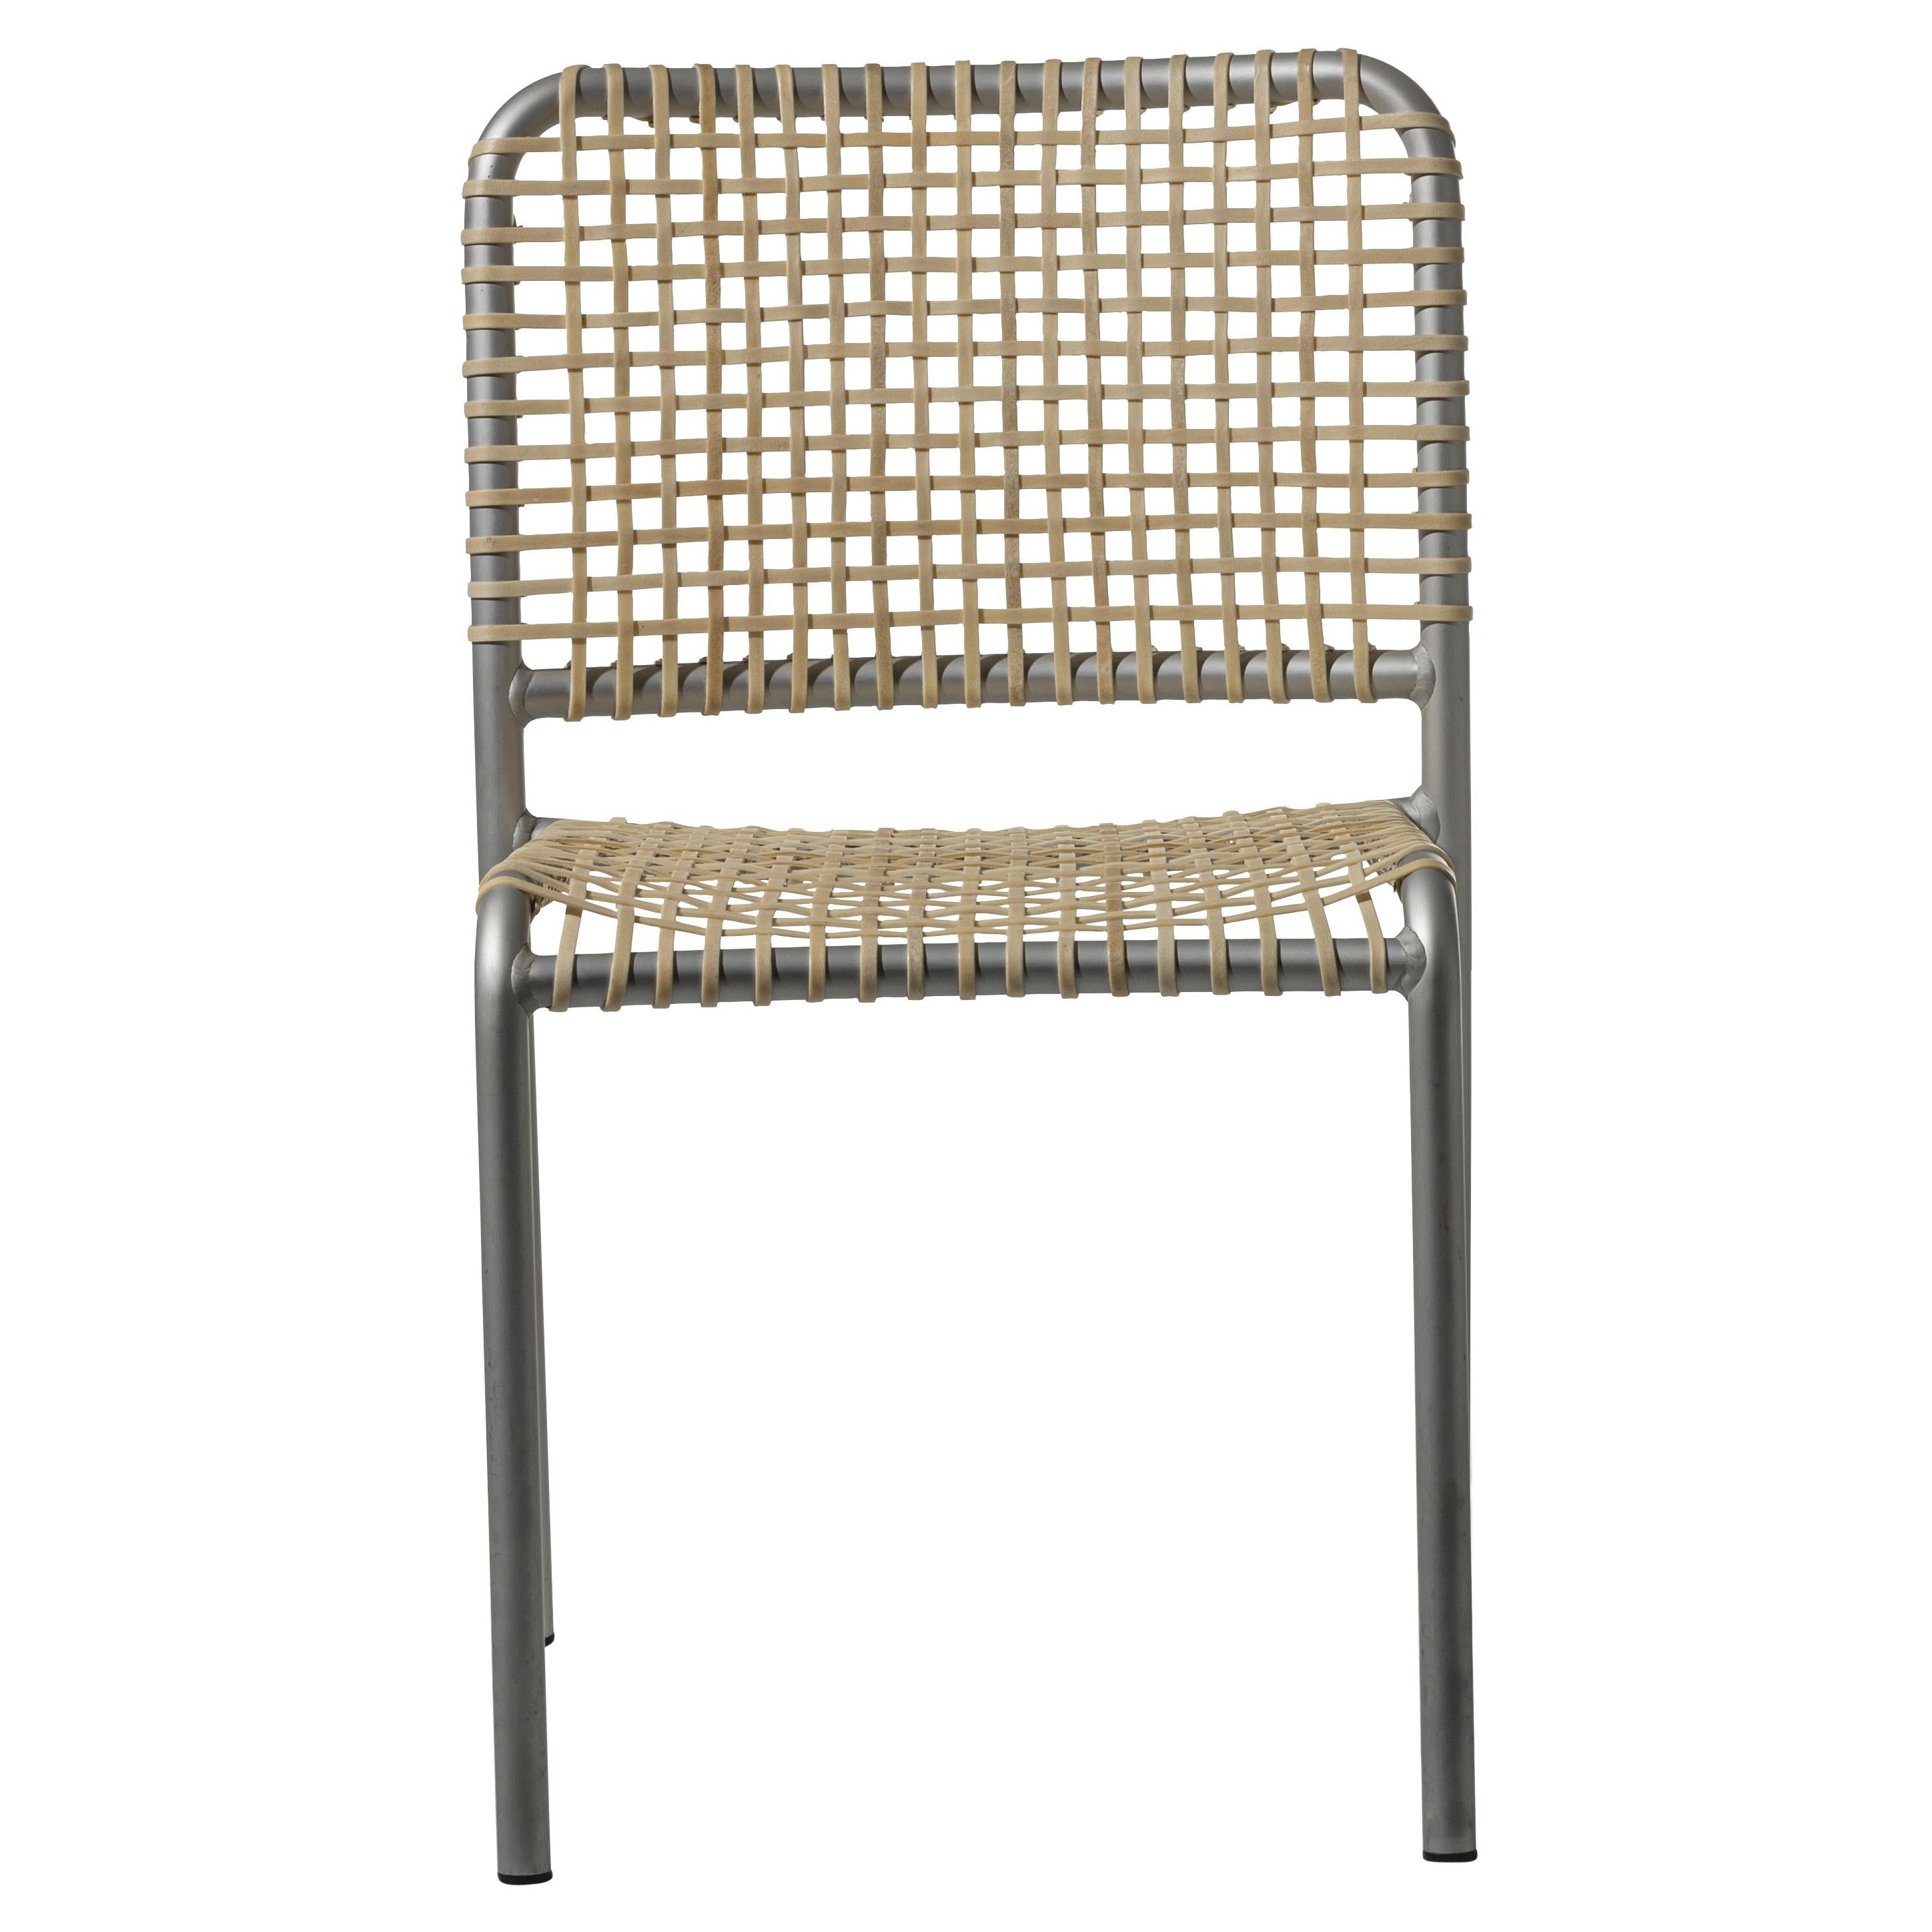 Gervasoni Allu 23 I Chair in Aluminium Frame and Woven with Natural Rawhide